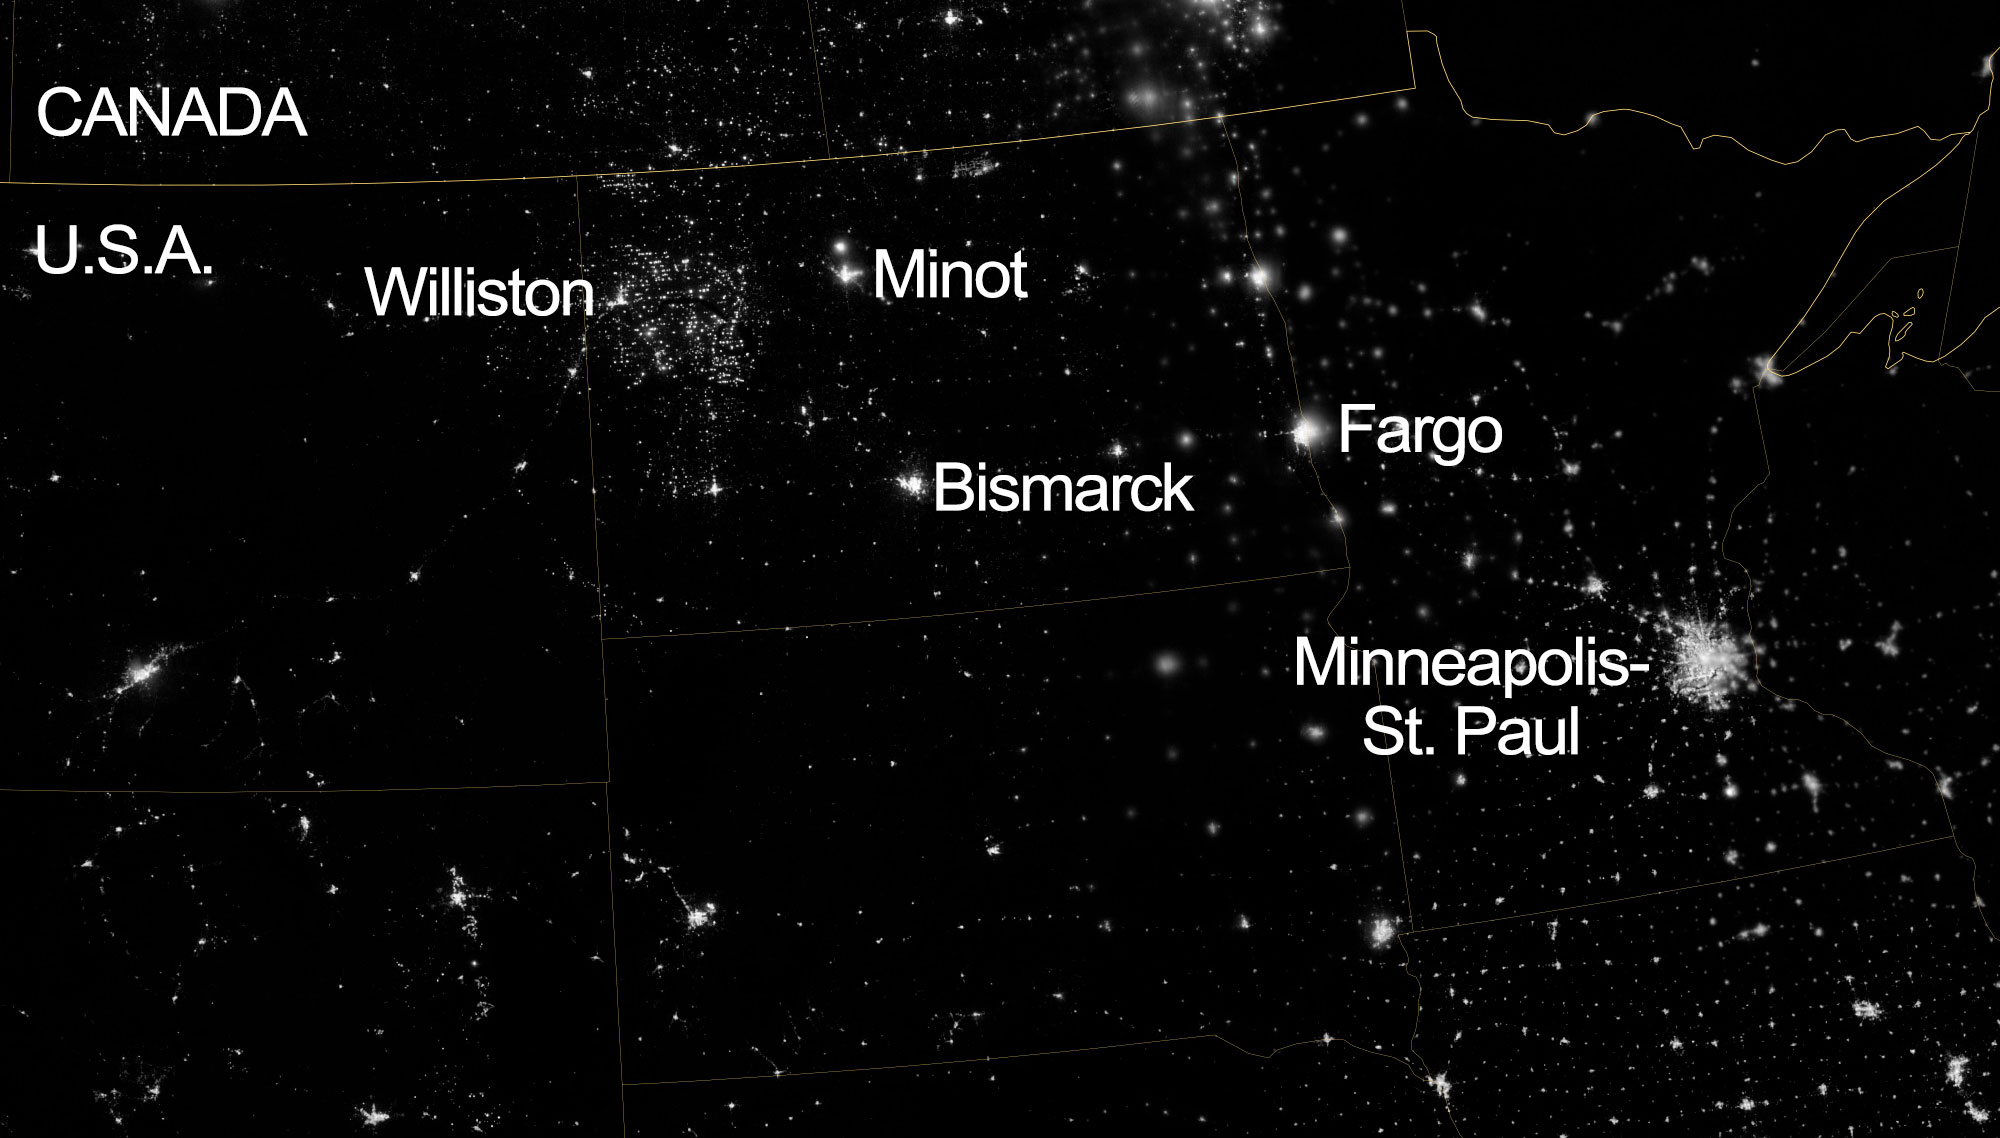 A nighttime satellite photograph of part of the north-central United States. Clusters of lights indicate the positions of cities. Labeled cities include Williston, Minot, Bismarck, and Fargo North Dakota and Minneapolis-St. Paul in Minnesota. A concentration of lights in the area near Williston indicates the intensity of oil and gas development in the Bakken Formation.